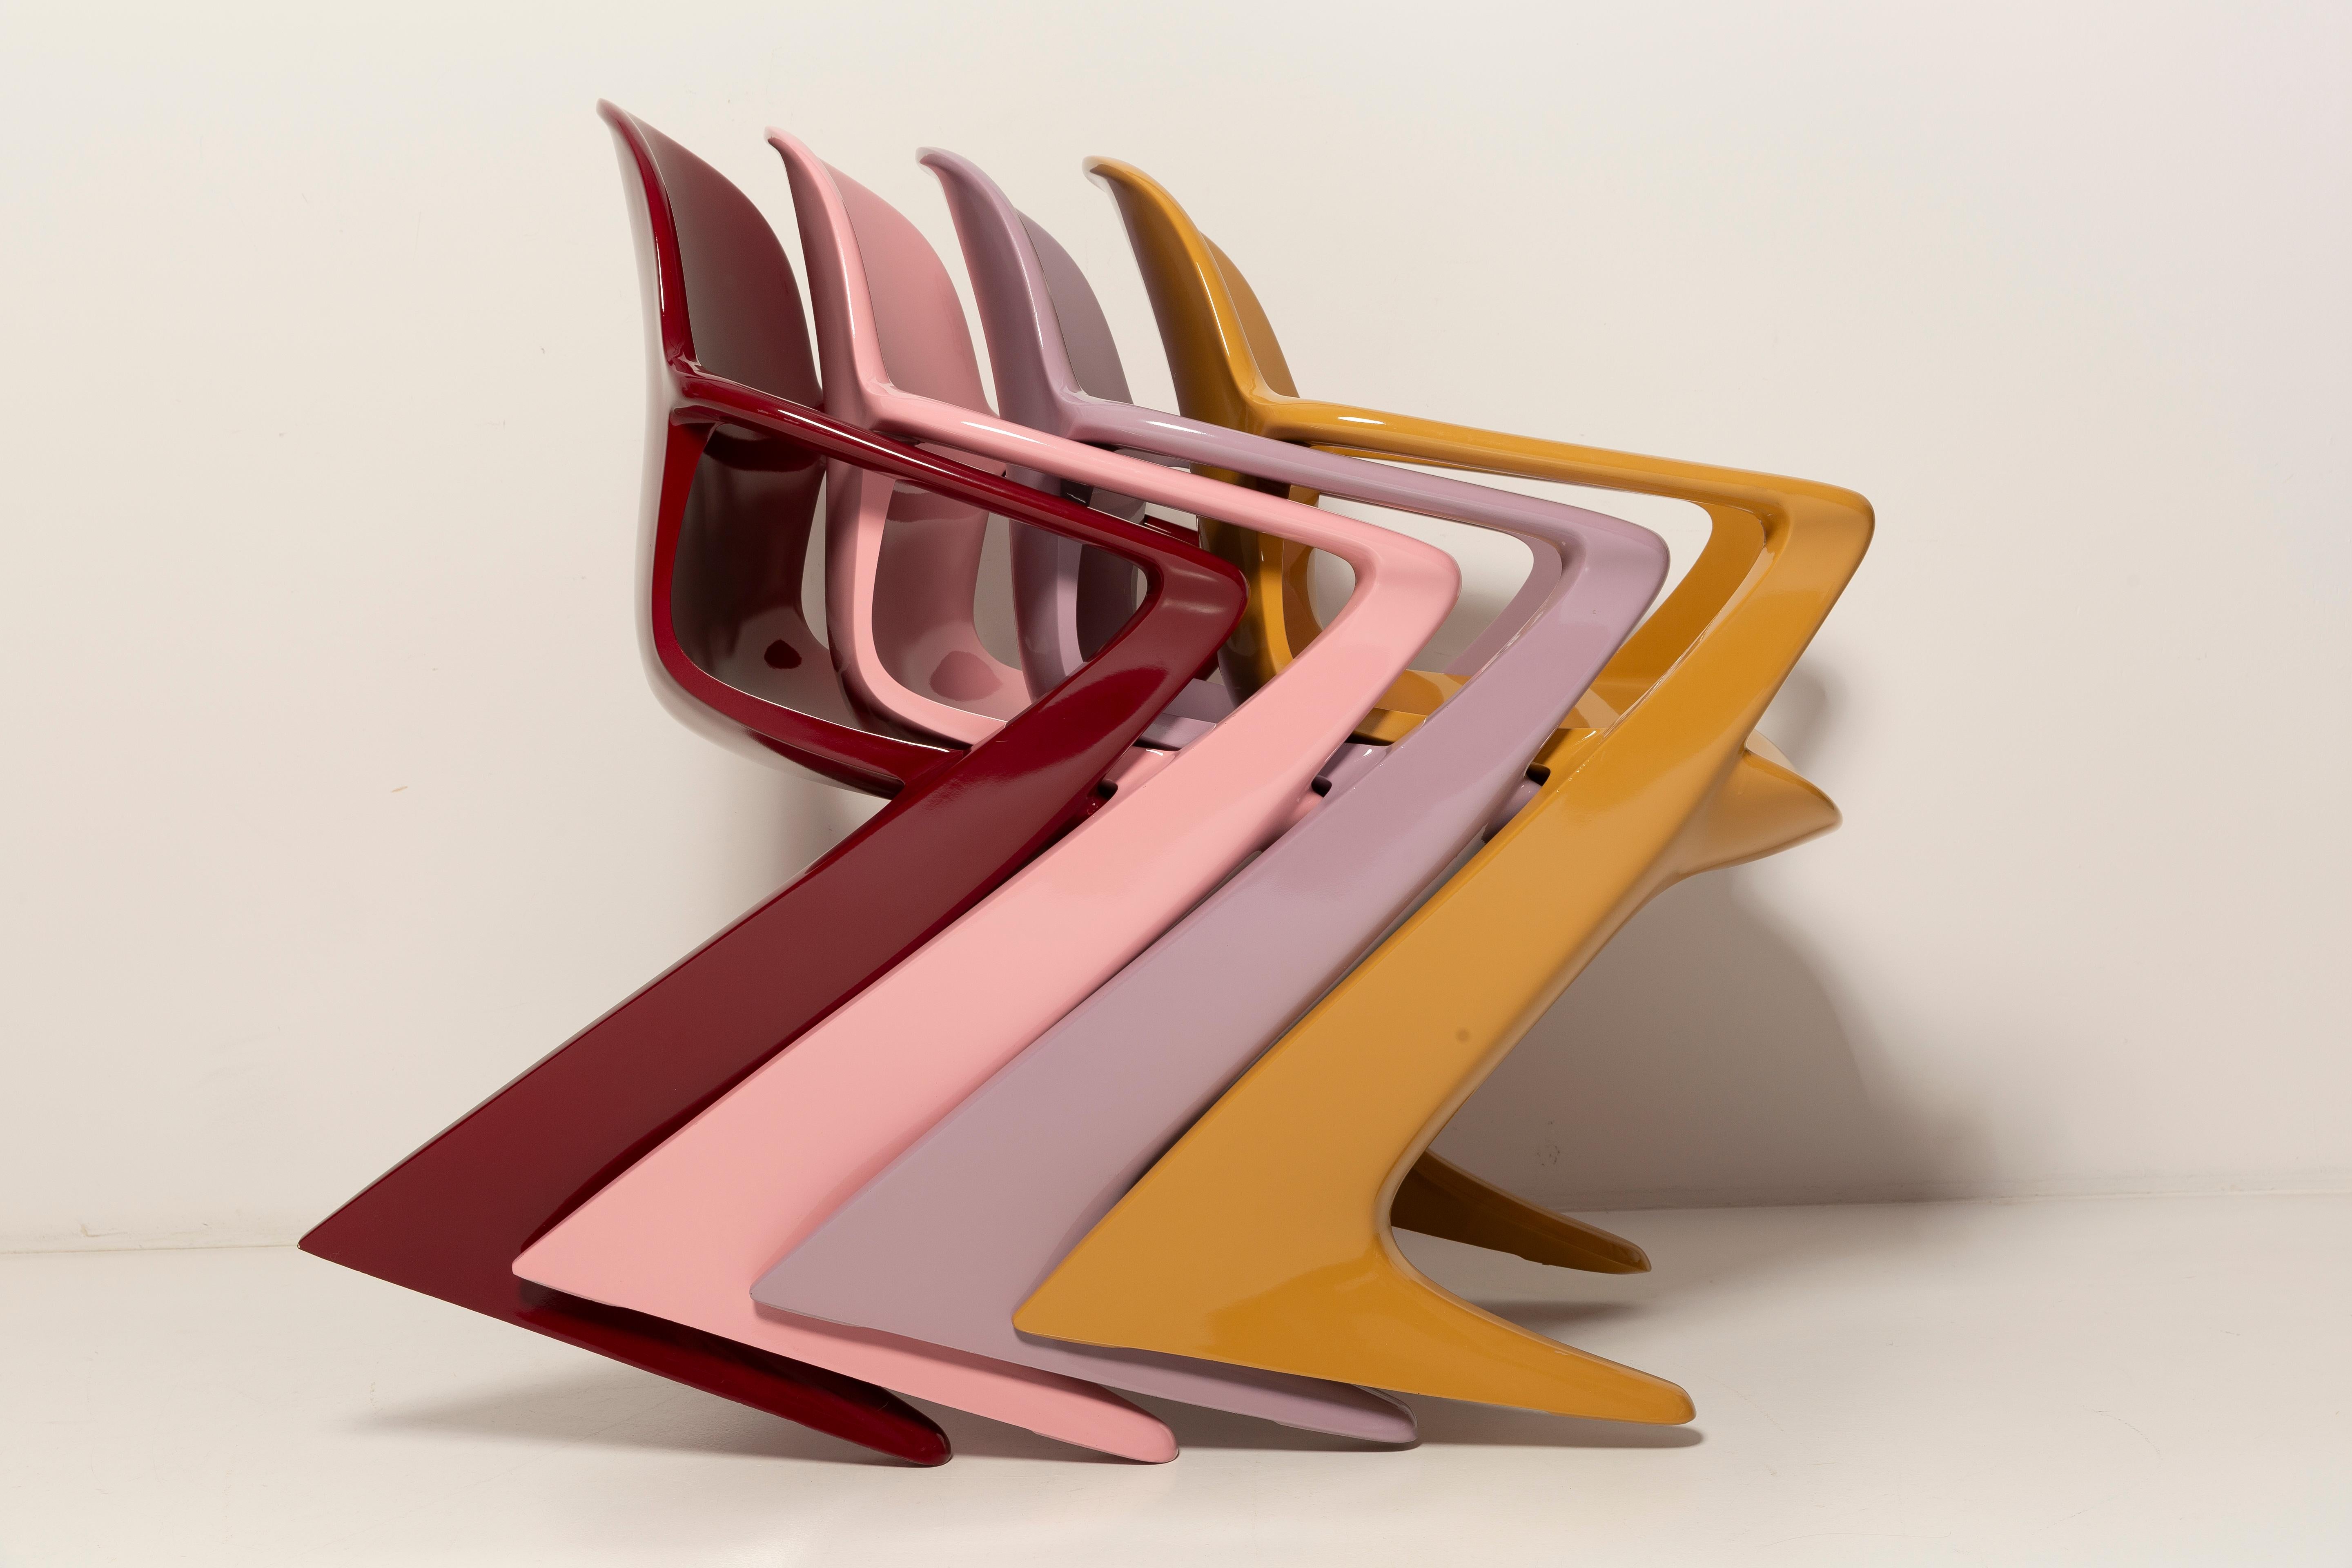 Set of Six Mid Century Kangaroo Chairs, Ernst Moeckl, Germany, 1968 For Sale 1